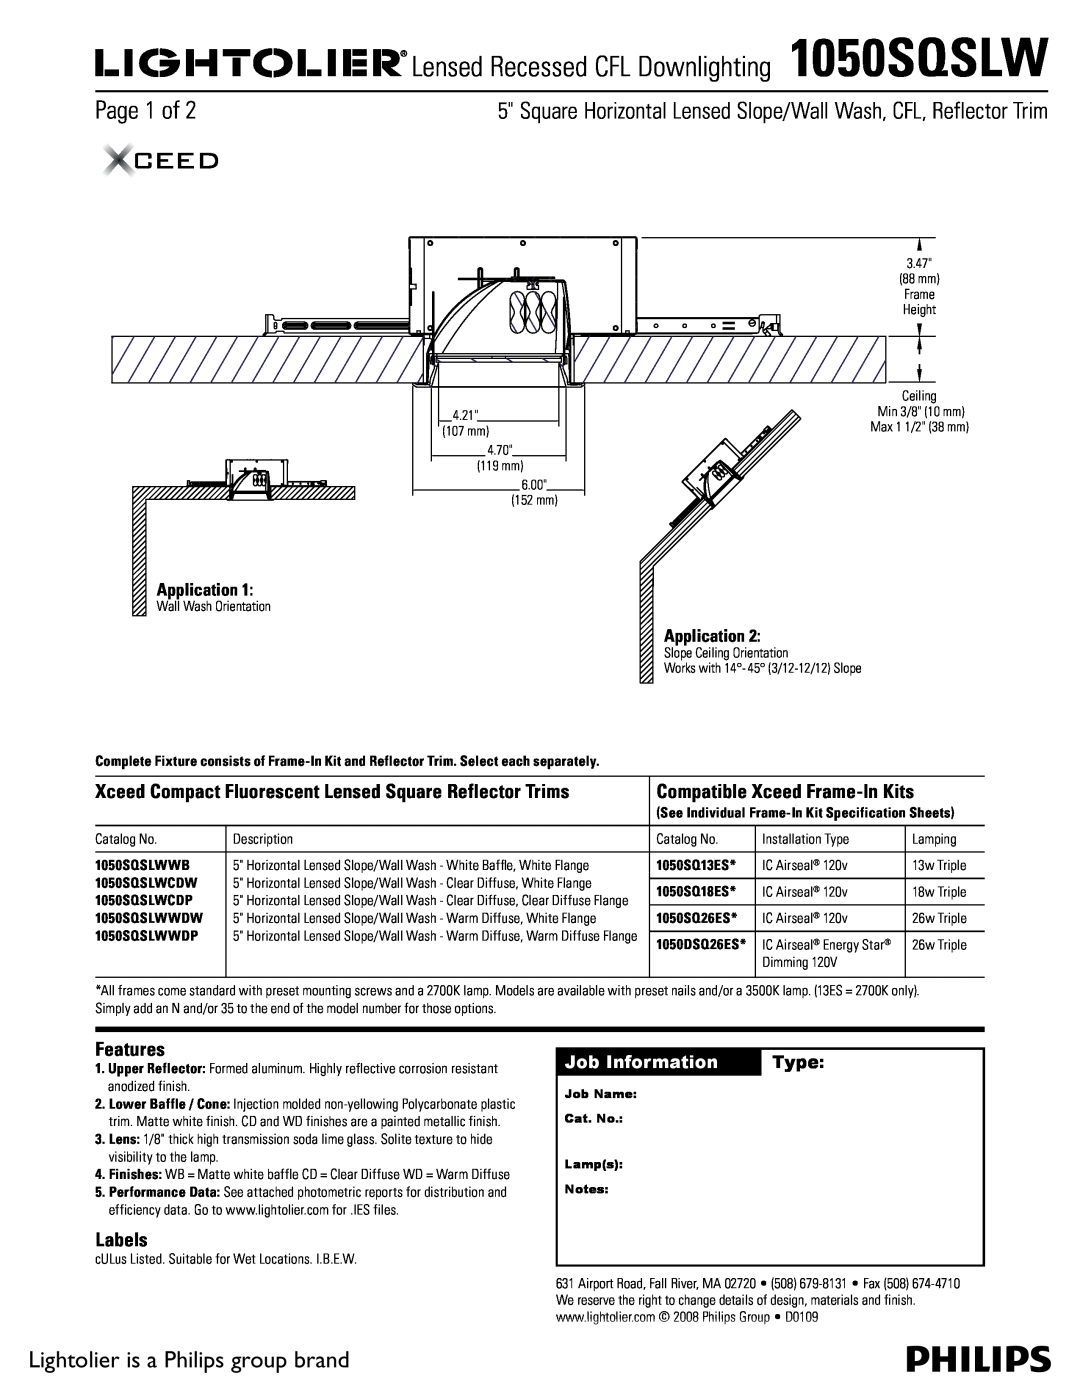 Lightolier 1050SQSLW specifications Page 1 of, Lightolier is a Philips group brand, Compatible Xceed Frame-InKits, Labels 